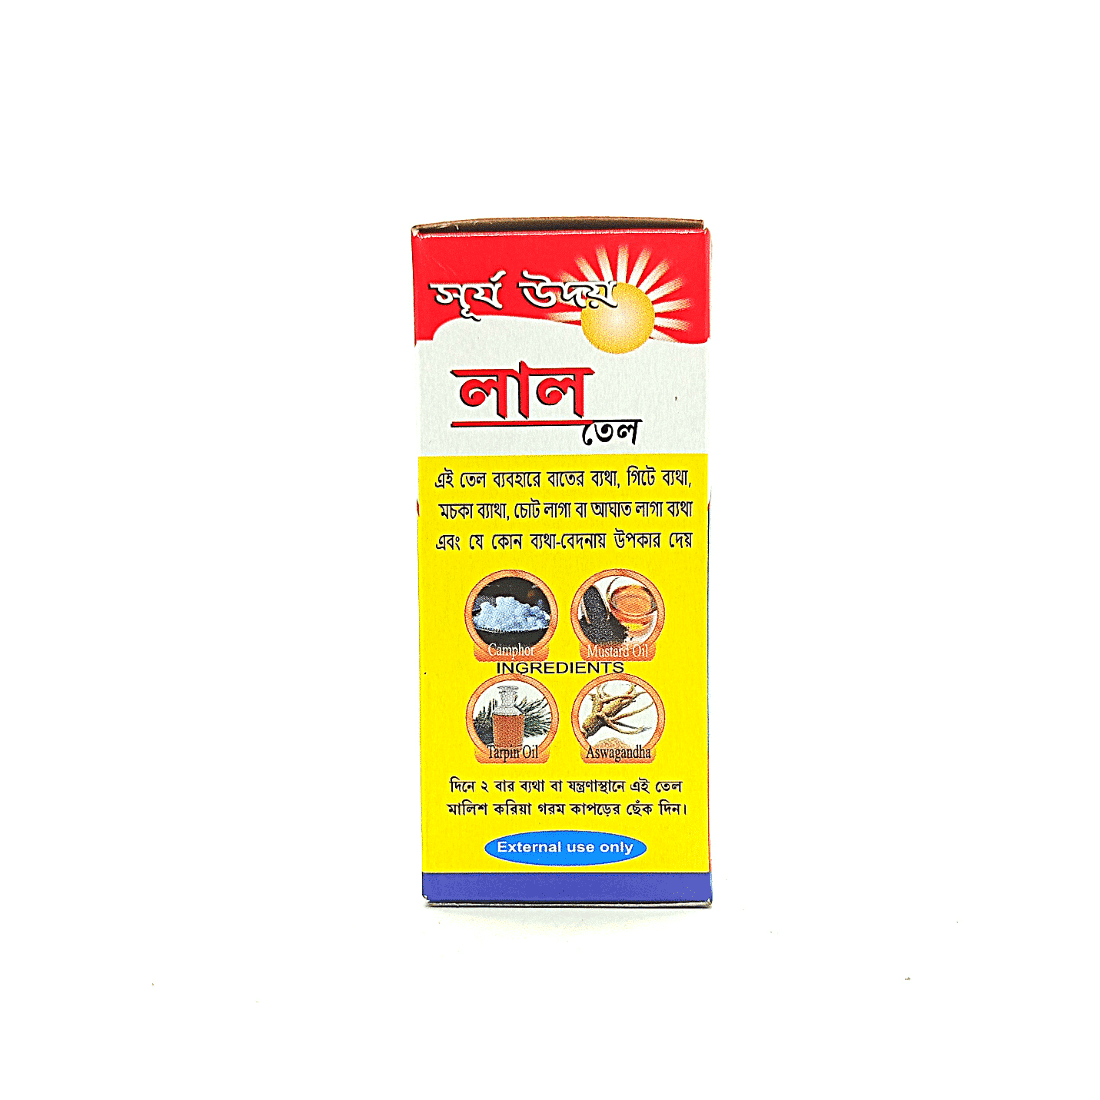 Buy Pain Relief Suryauday Lal Tail 60 ml For Joint Pain,Arthritis pain,Gout pain, Sprain pain, Pain from injury or trauma.